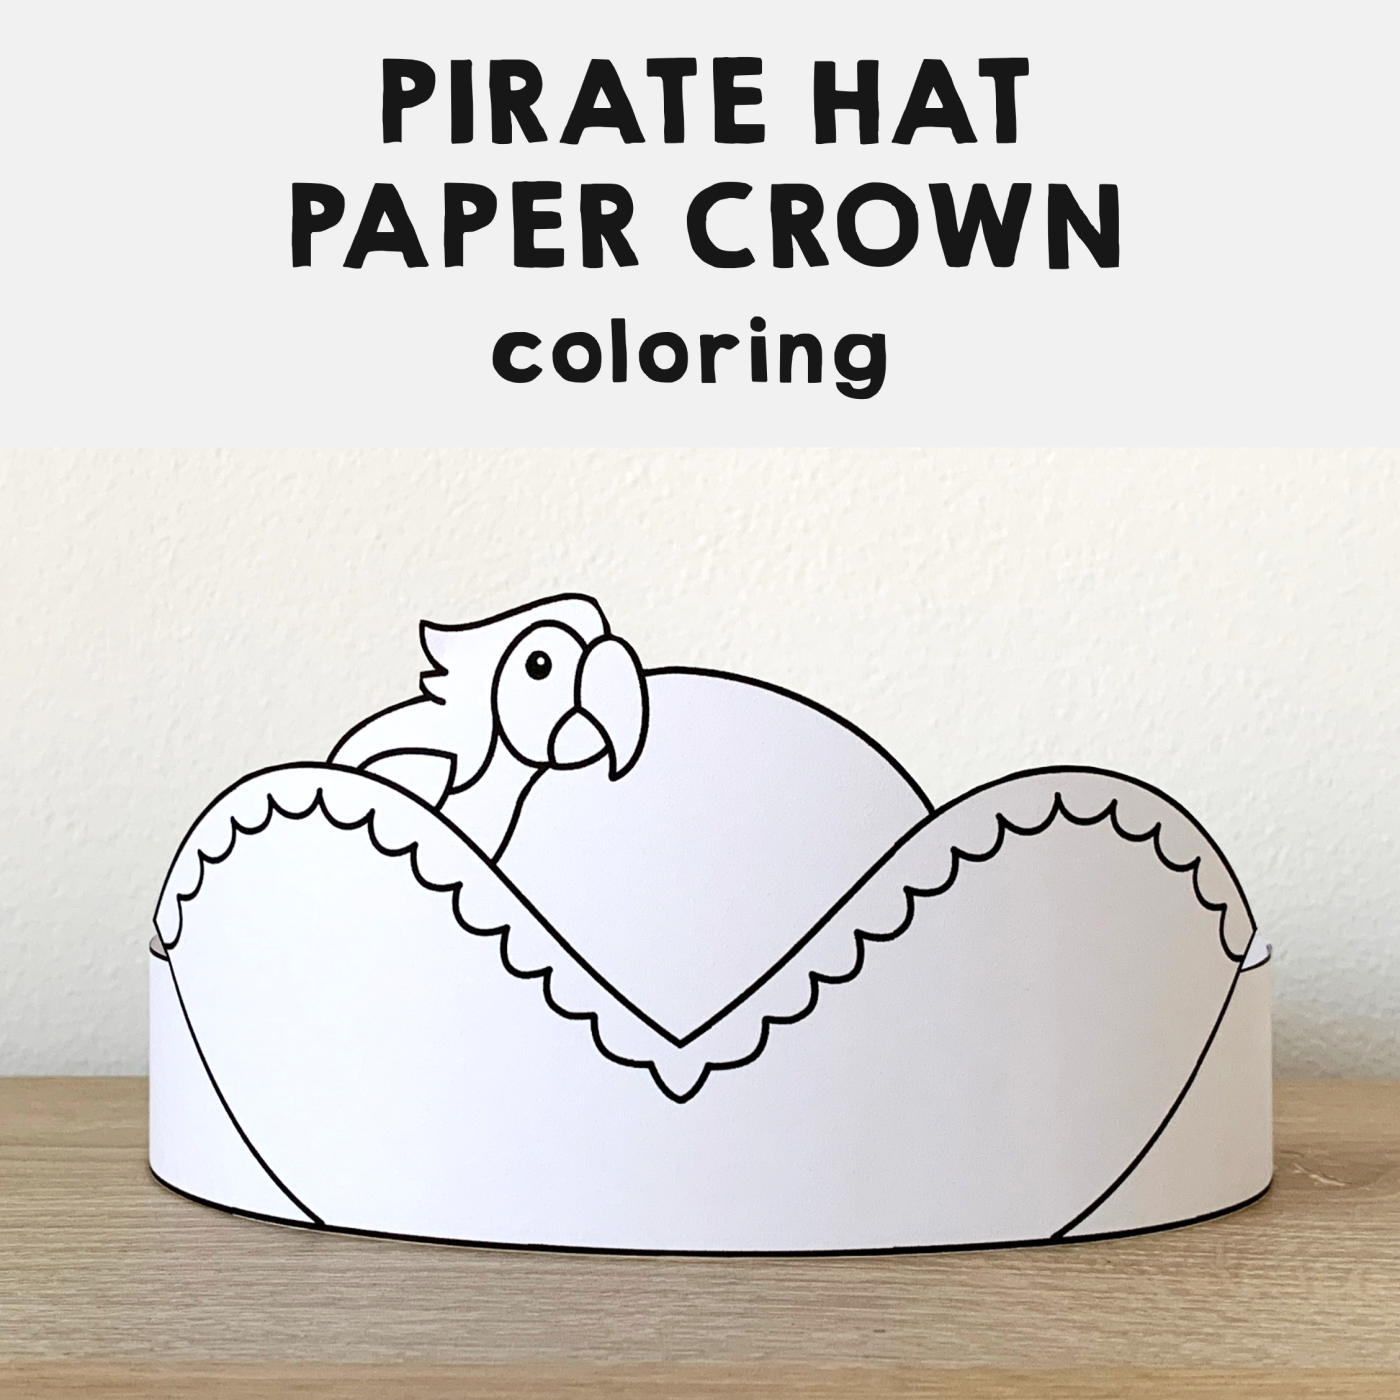 Pirate hat paper crown coloring craft parrot made by teachers